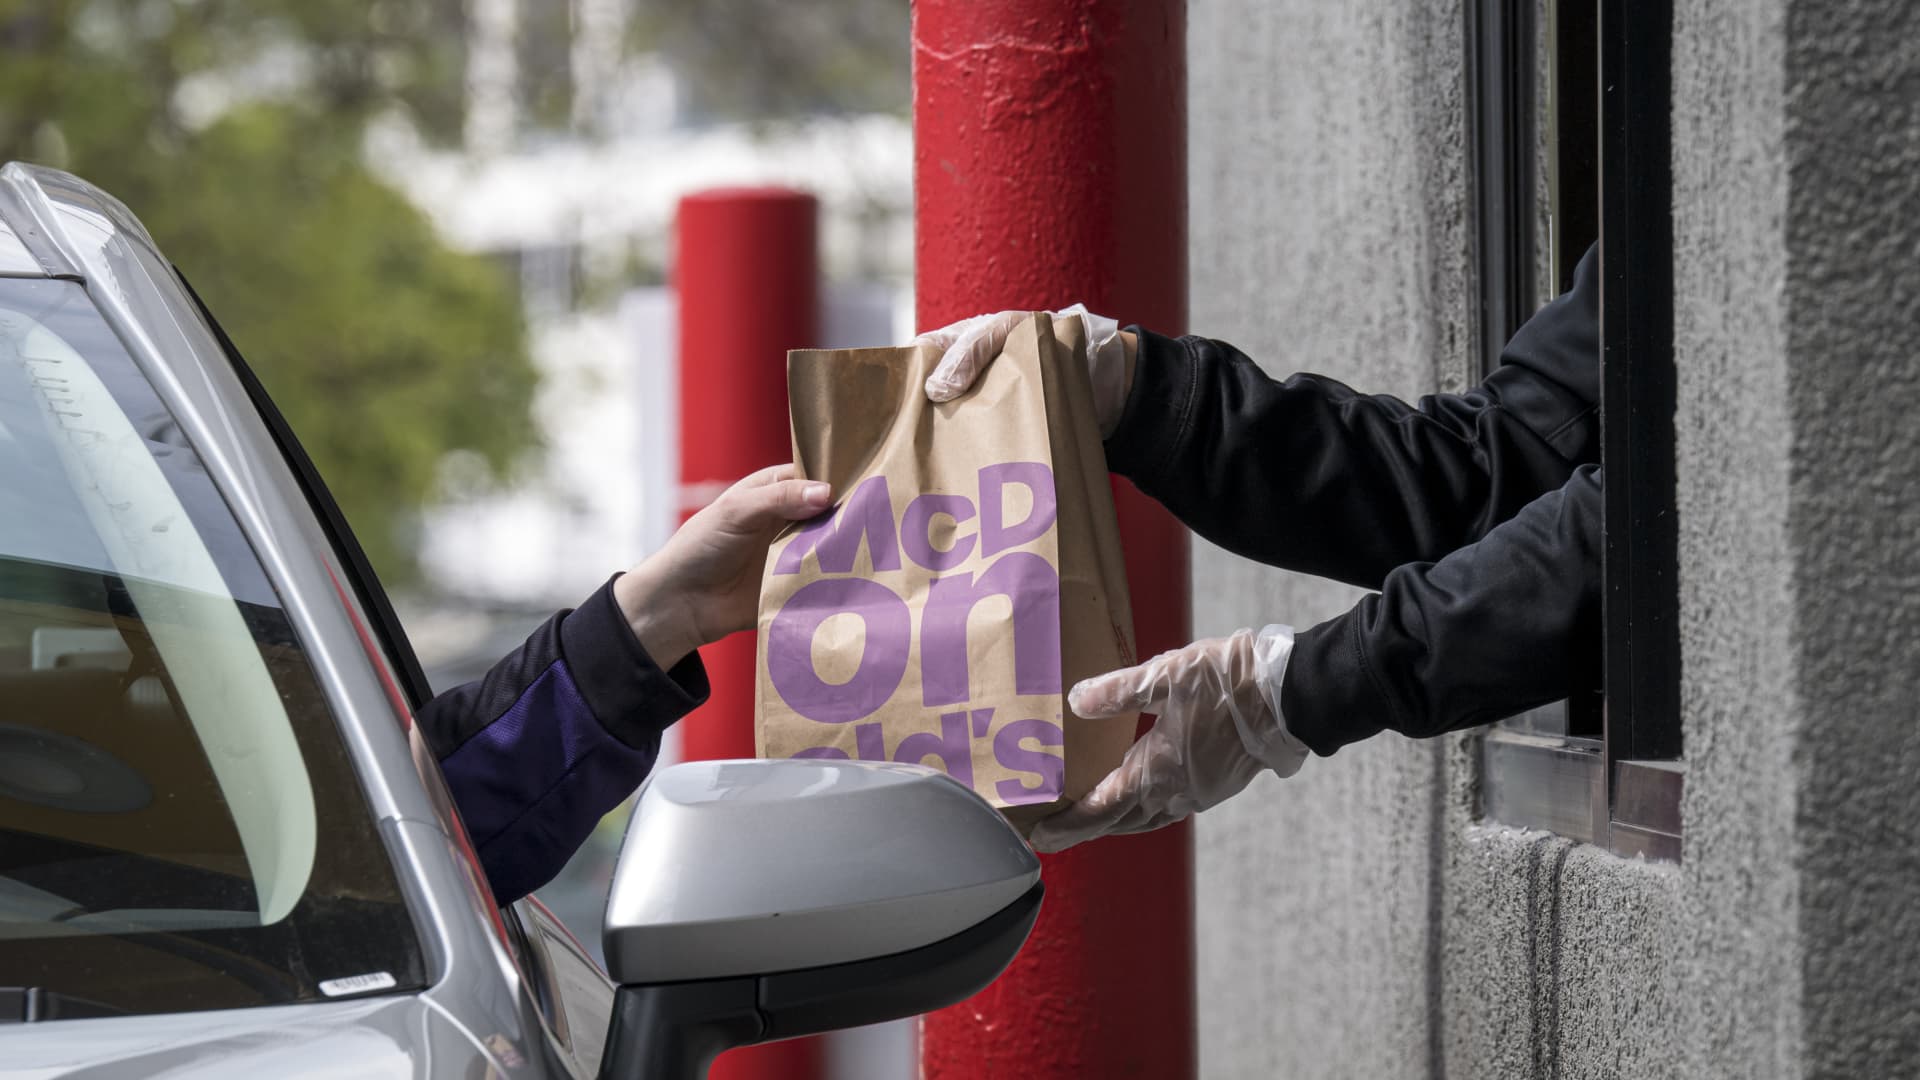 McDonald's franchisee group applauds $5 meal and calls for more